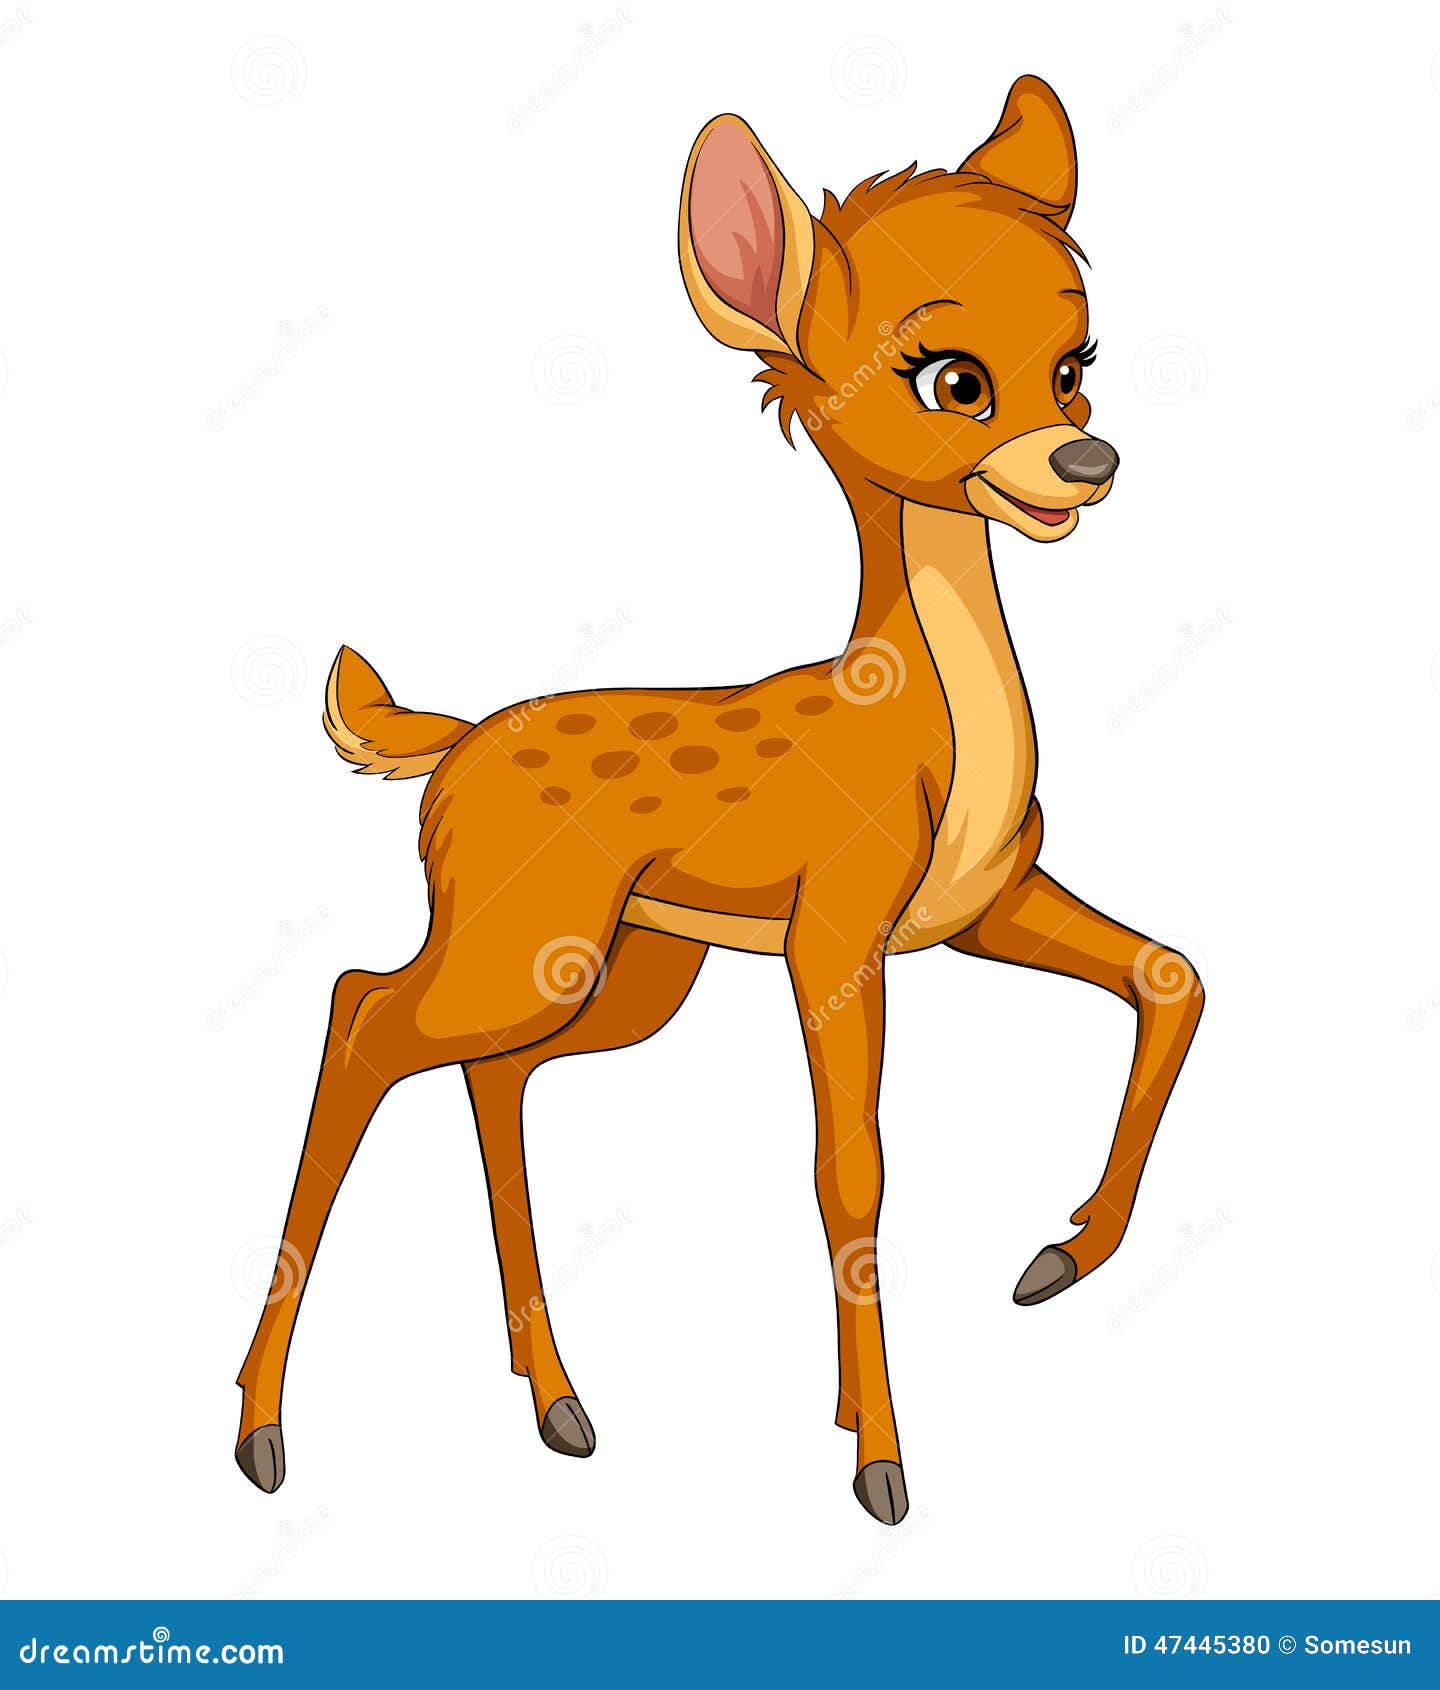 funny deer clipart - photo #11